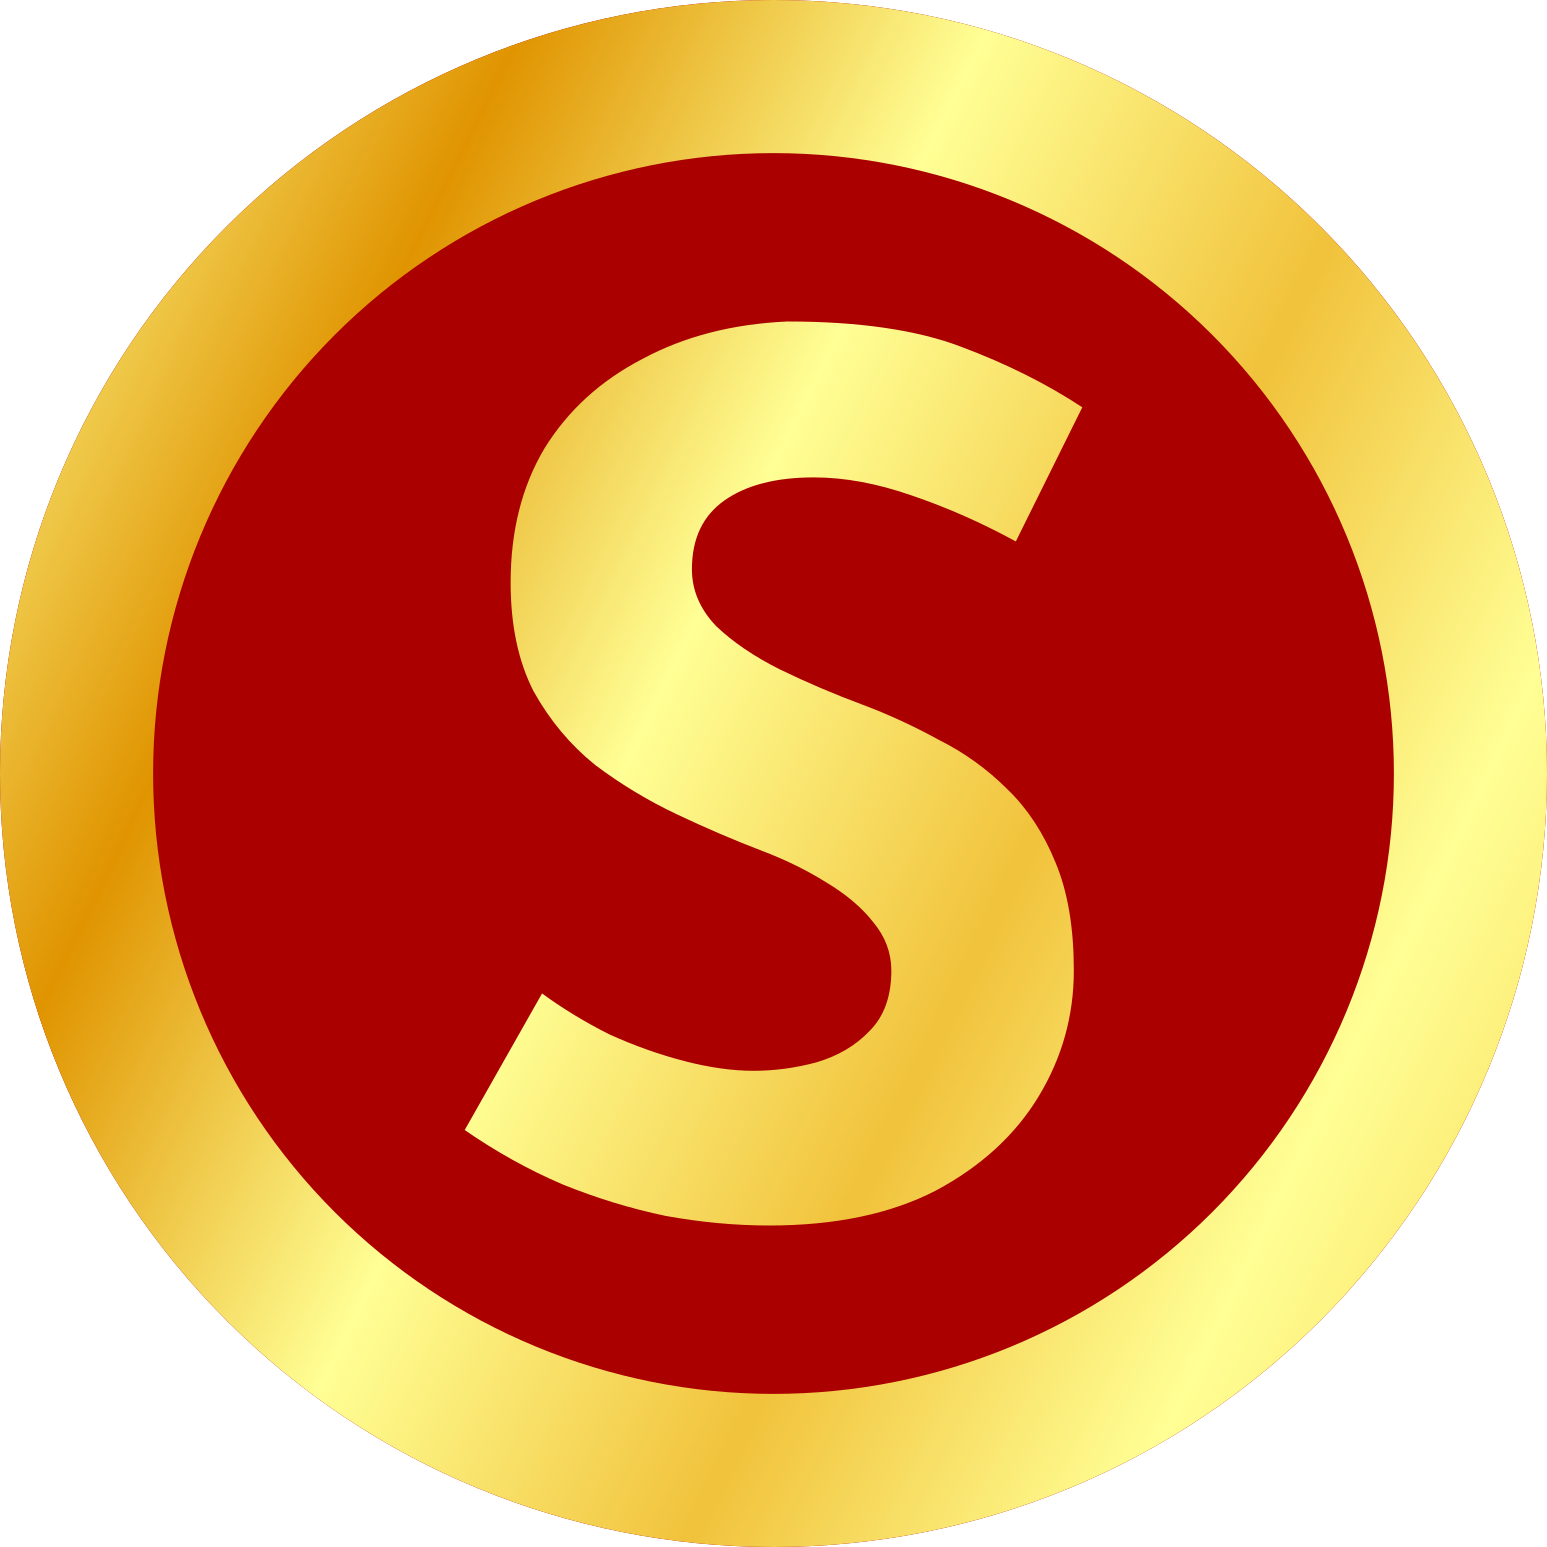 color gold s on gold circle red background